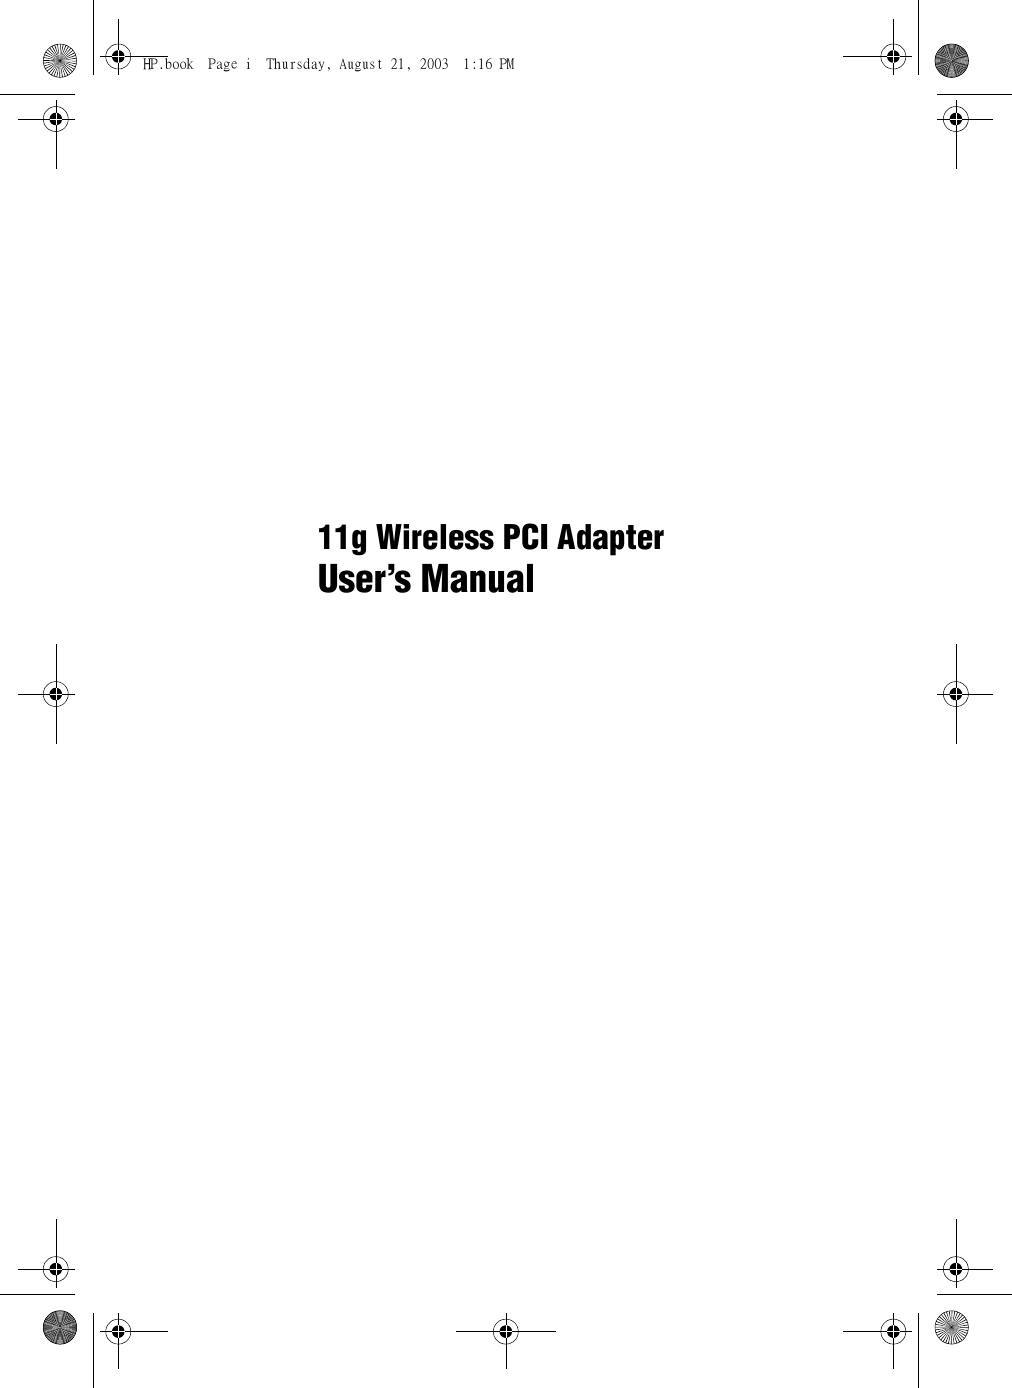 11g Wireless PCI AdapterUser’s ManualHP.book  Page i  Thursday, August 21, 2003  1:16 PM